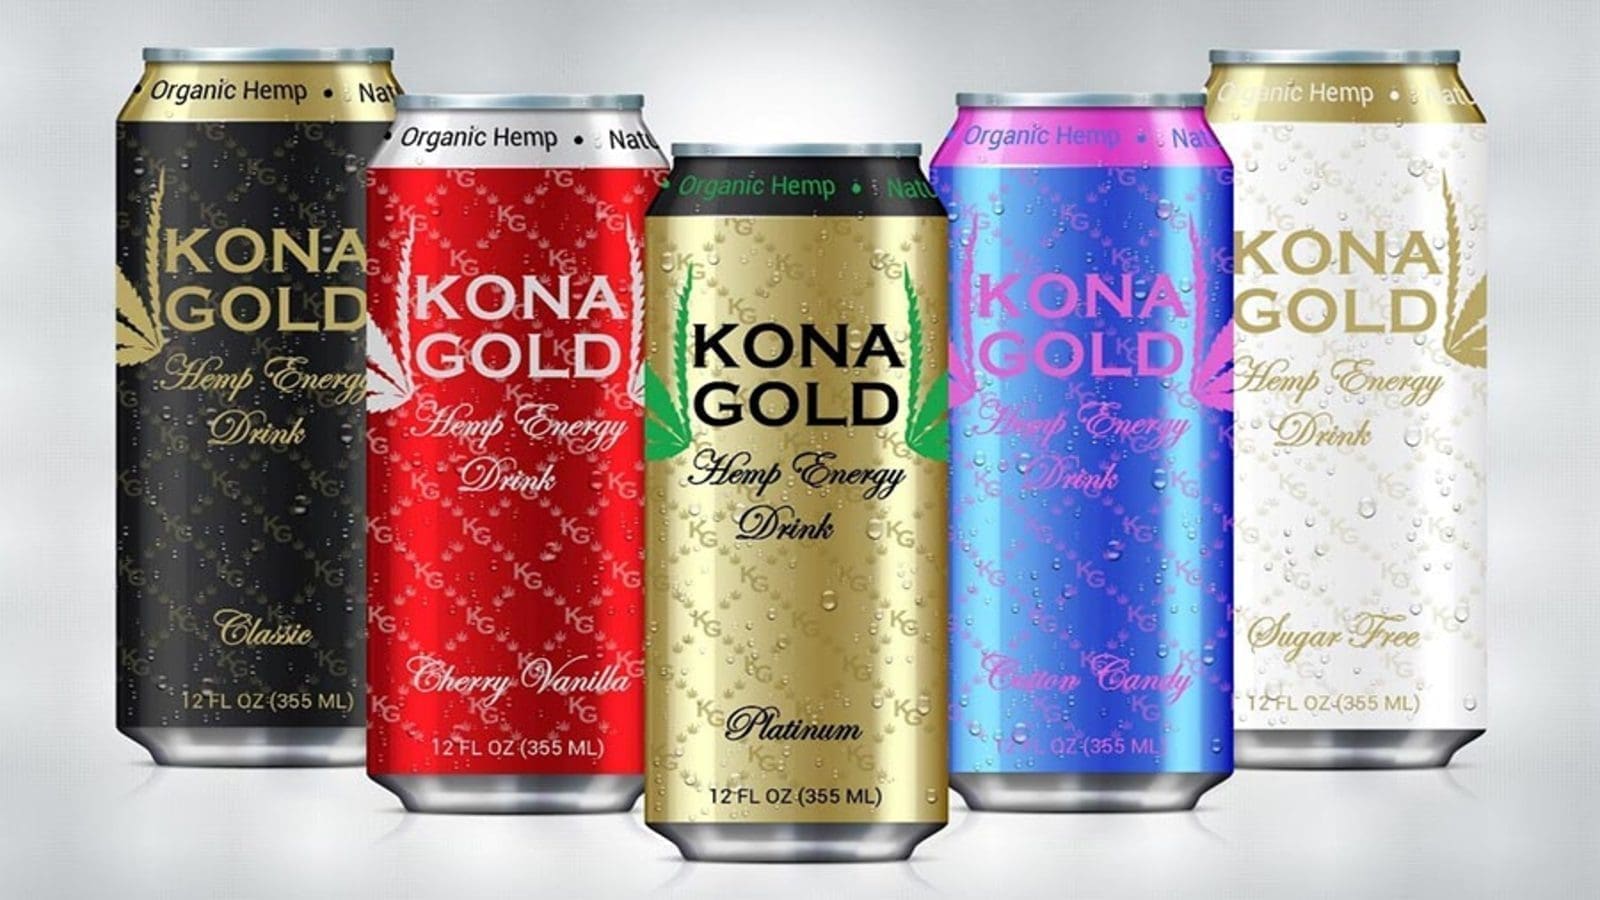 Kona Gold Beverage inks Idaho and Montana’s distribution deal with Hayden Beverage Company